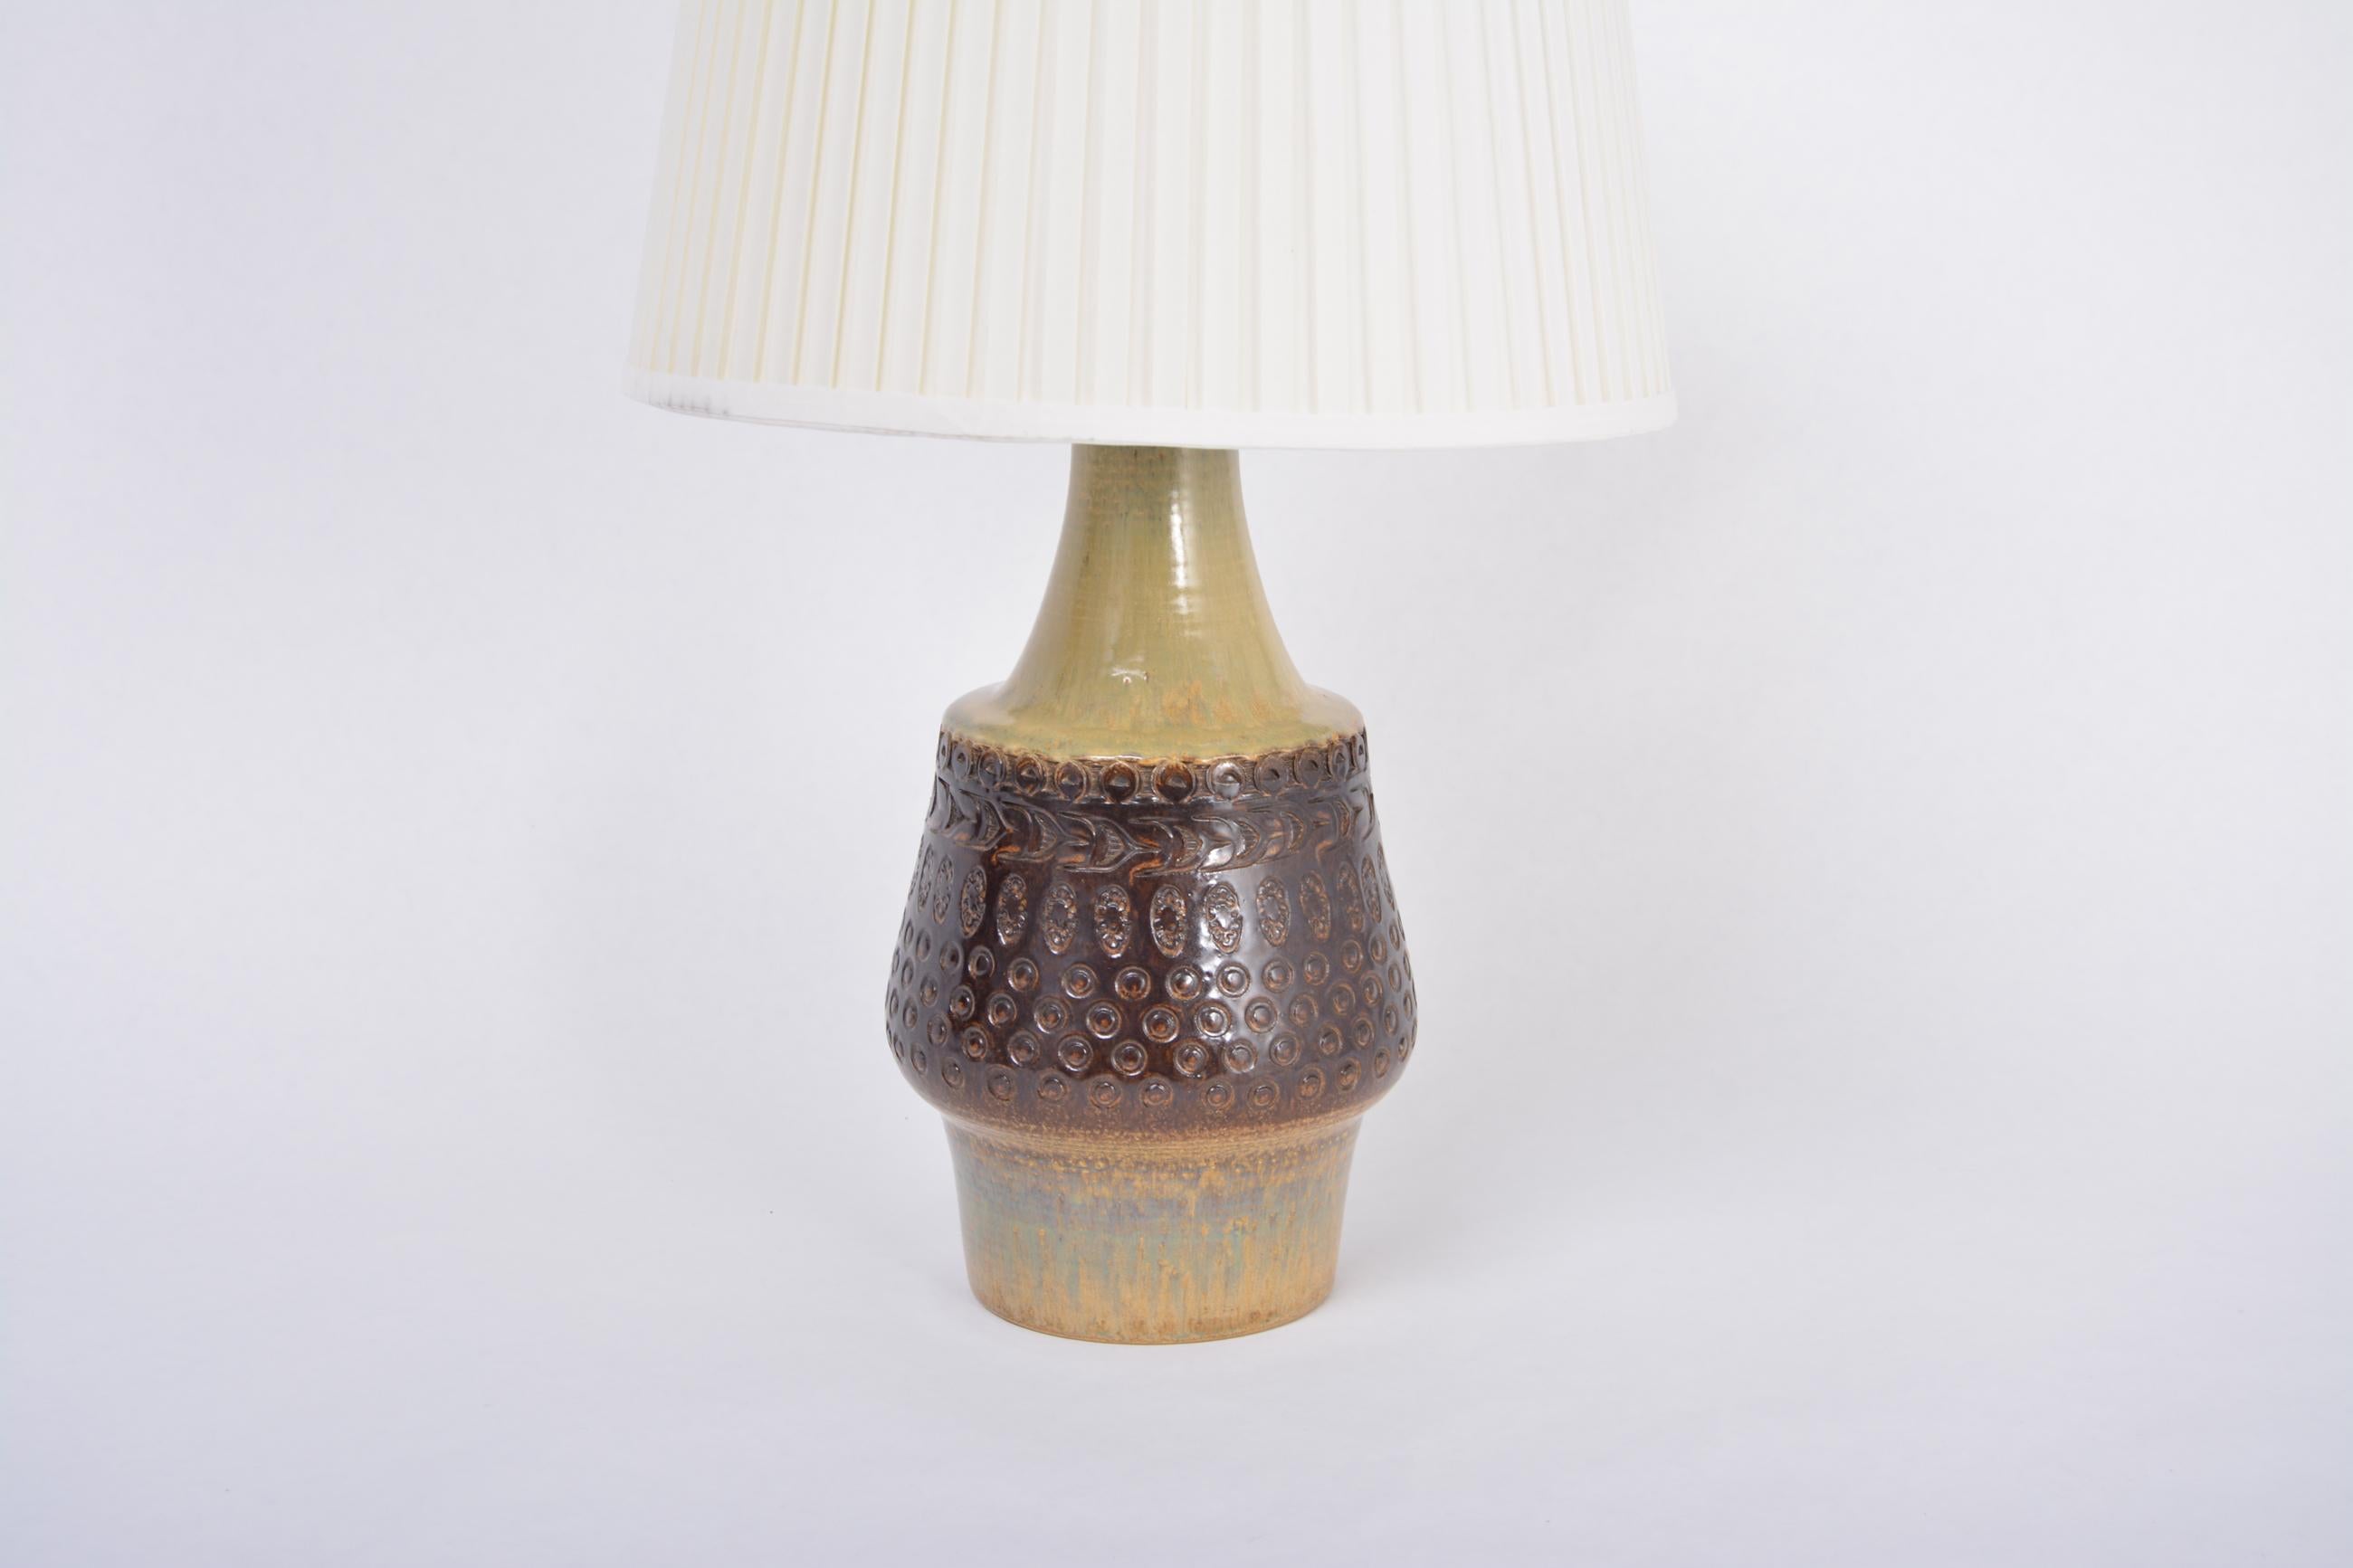 Brown handmade Mid-Century Modern Danish stoneware table lamp by Soholm Stentoj

Spectacular tall table lamp made of stoneware with ceramic glazing in various tones of brown and yellow. The base of the lamp features various graphic patterns.